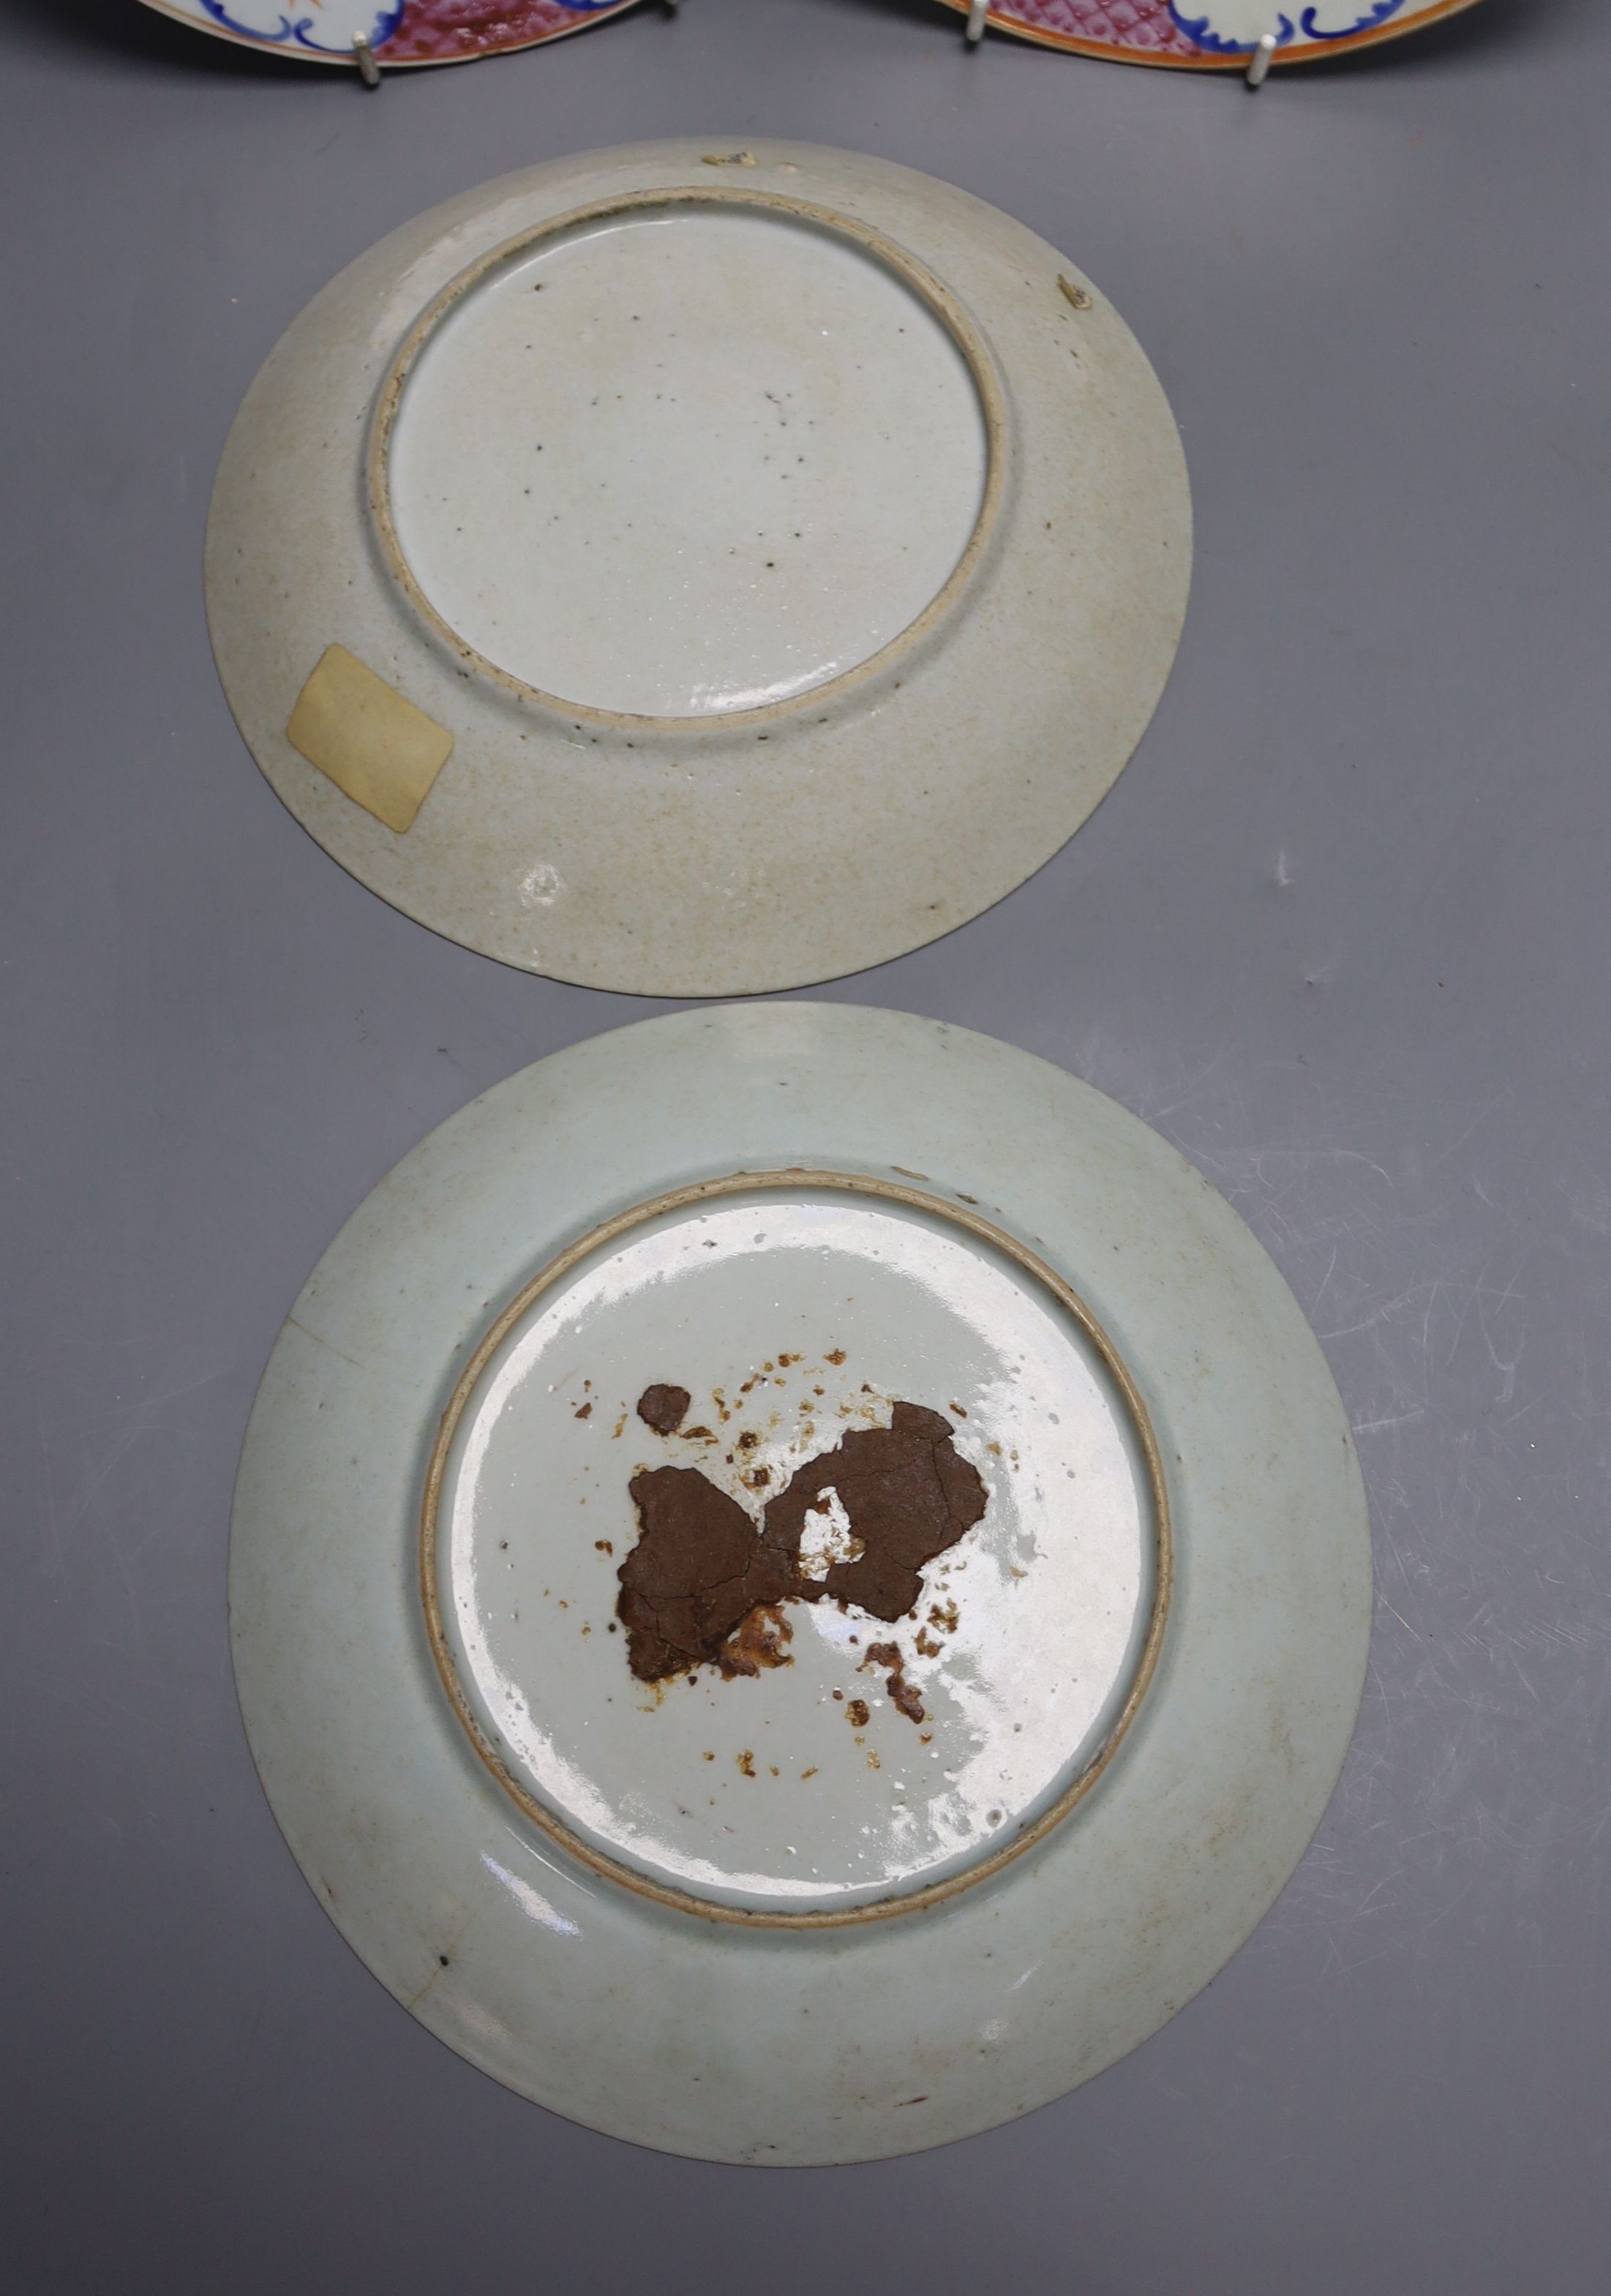 Three early 19th century Chinese polychrome-decorated shallow dishes and a matching plate (one repaired), Dia 22cm